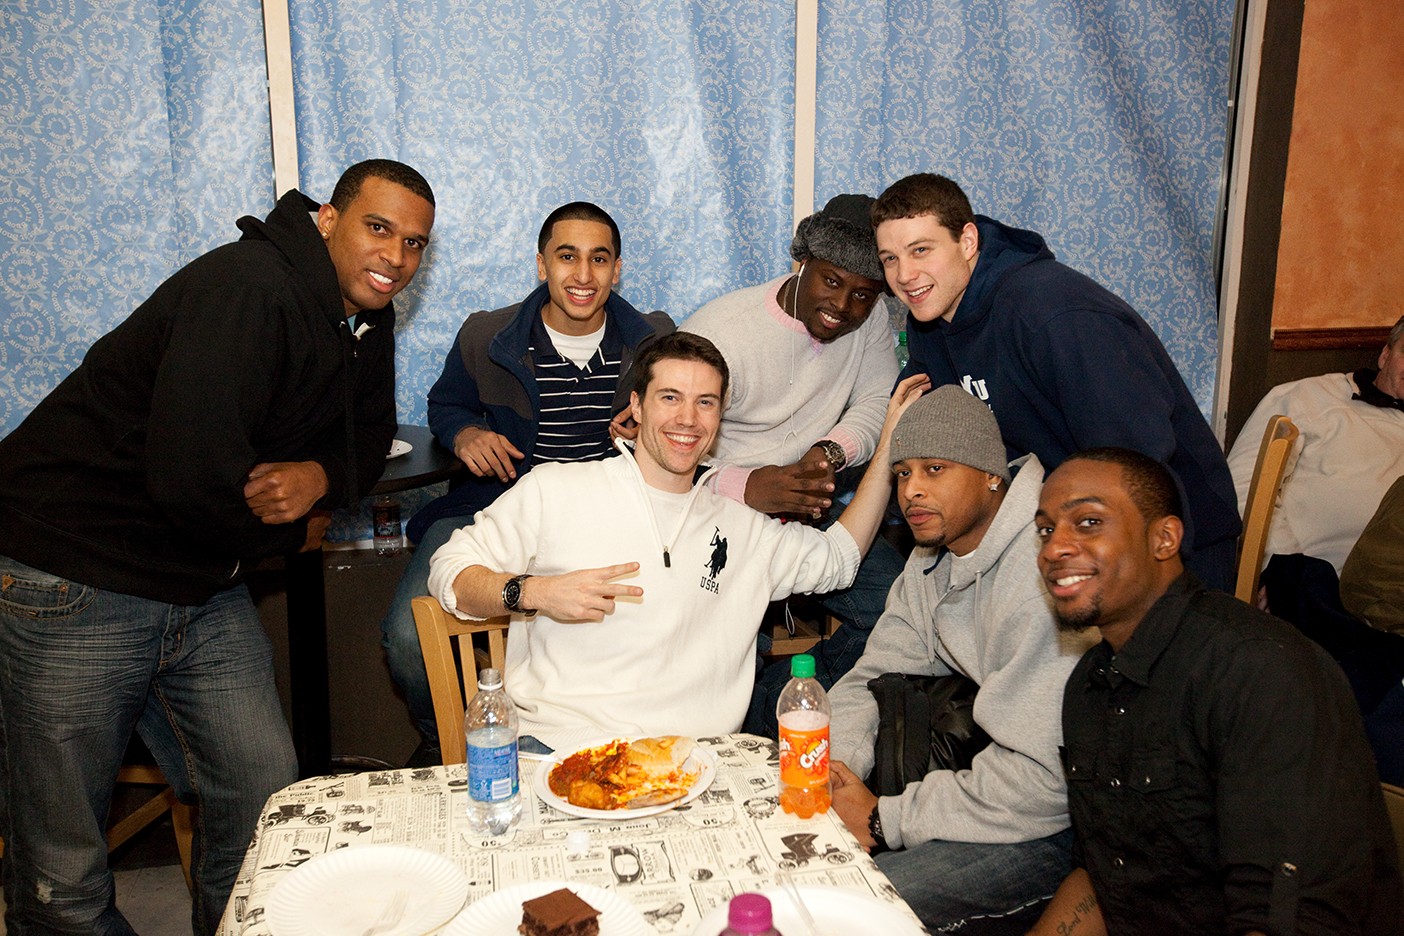 Jimmer Fredette with his older brother, TJ, and five other friends around a table in a home.